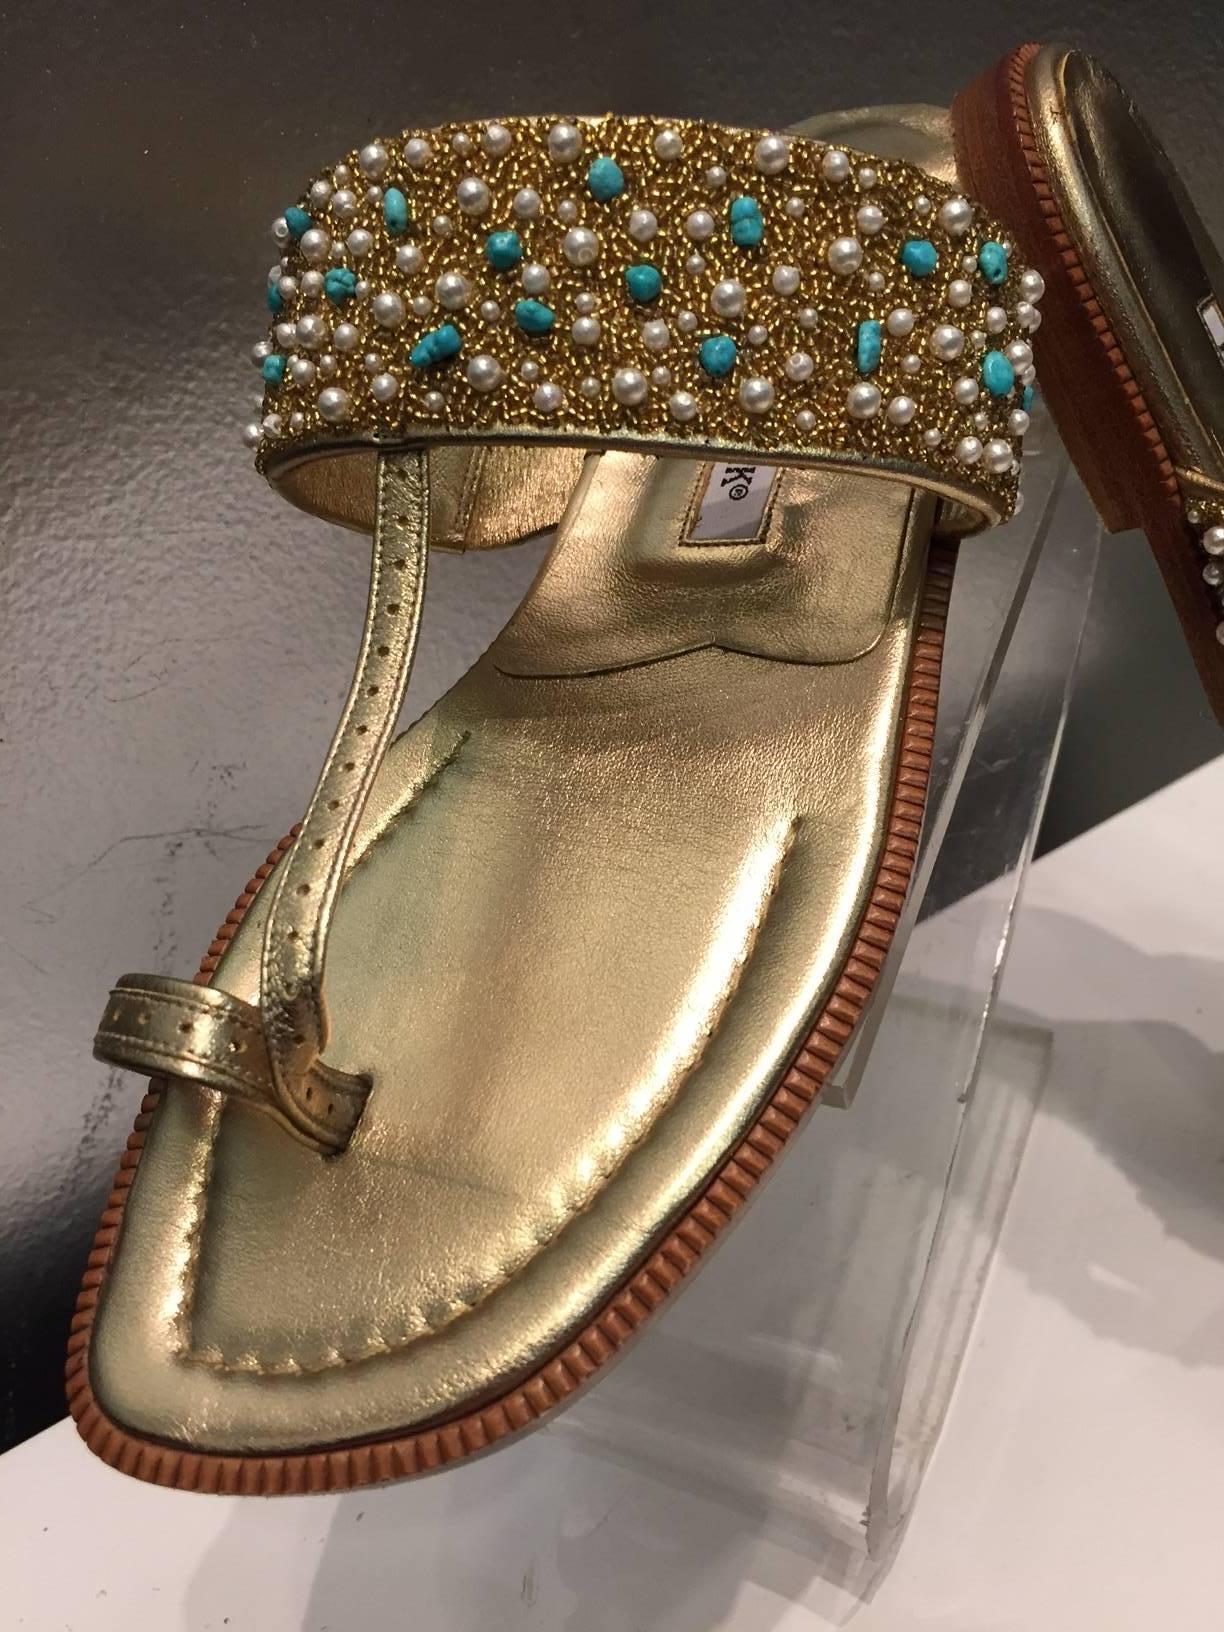 Brown Manolo Blahnik Gold Leather Sandal with Turquoise, Pearl and Gold Beaded Vamp